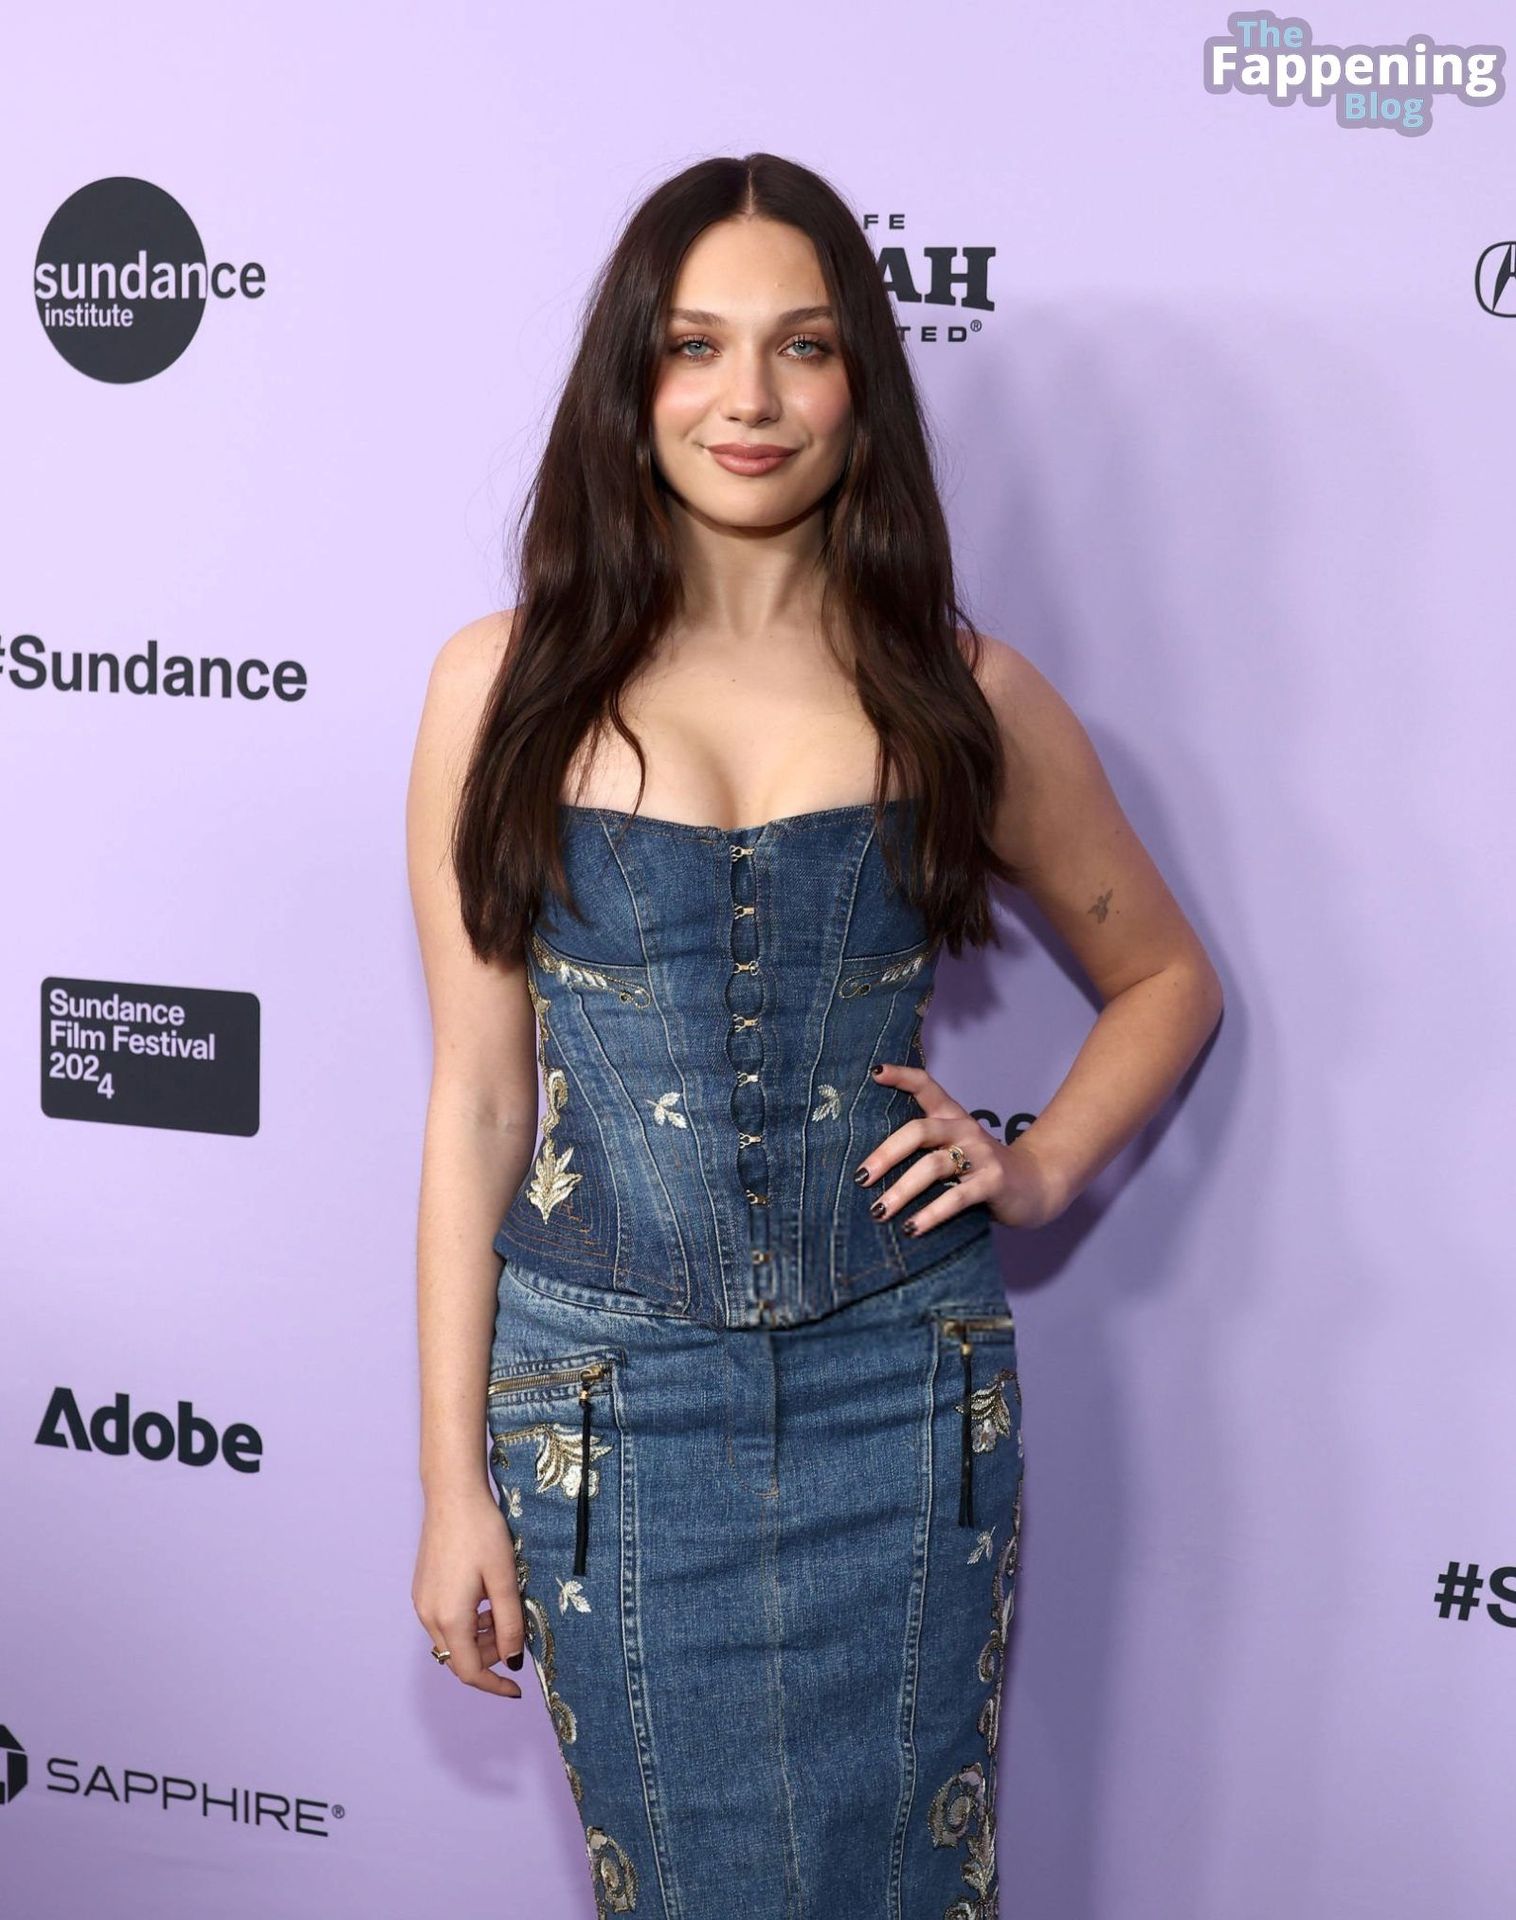 Maddie-Ziegler-My-Old-Ass-Premiere-Sexy-Cleavage-1-thefappeningblog.com_.jpg